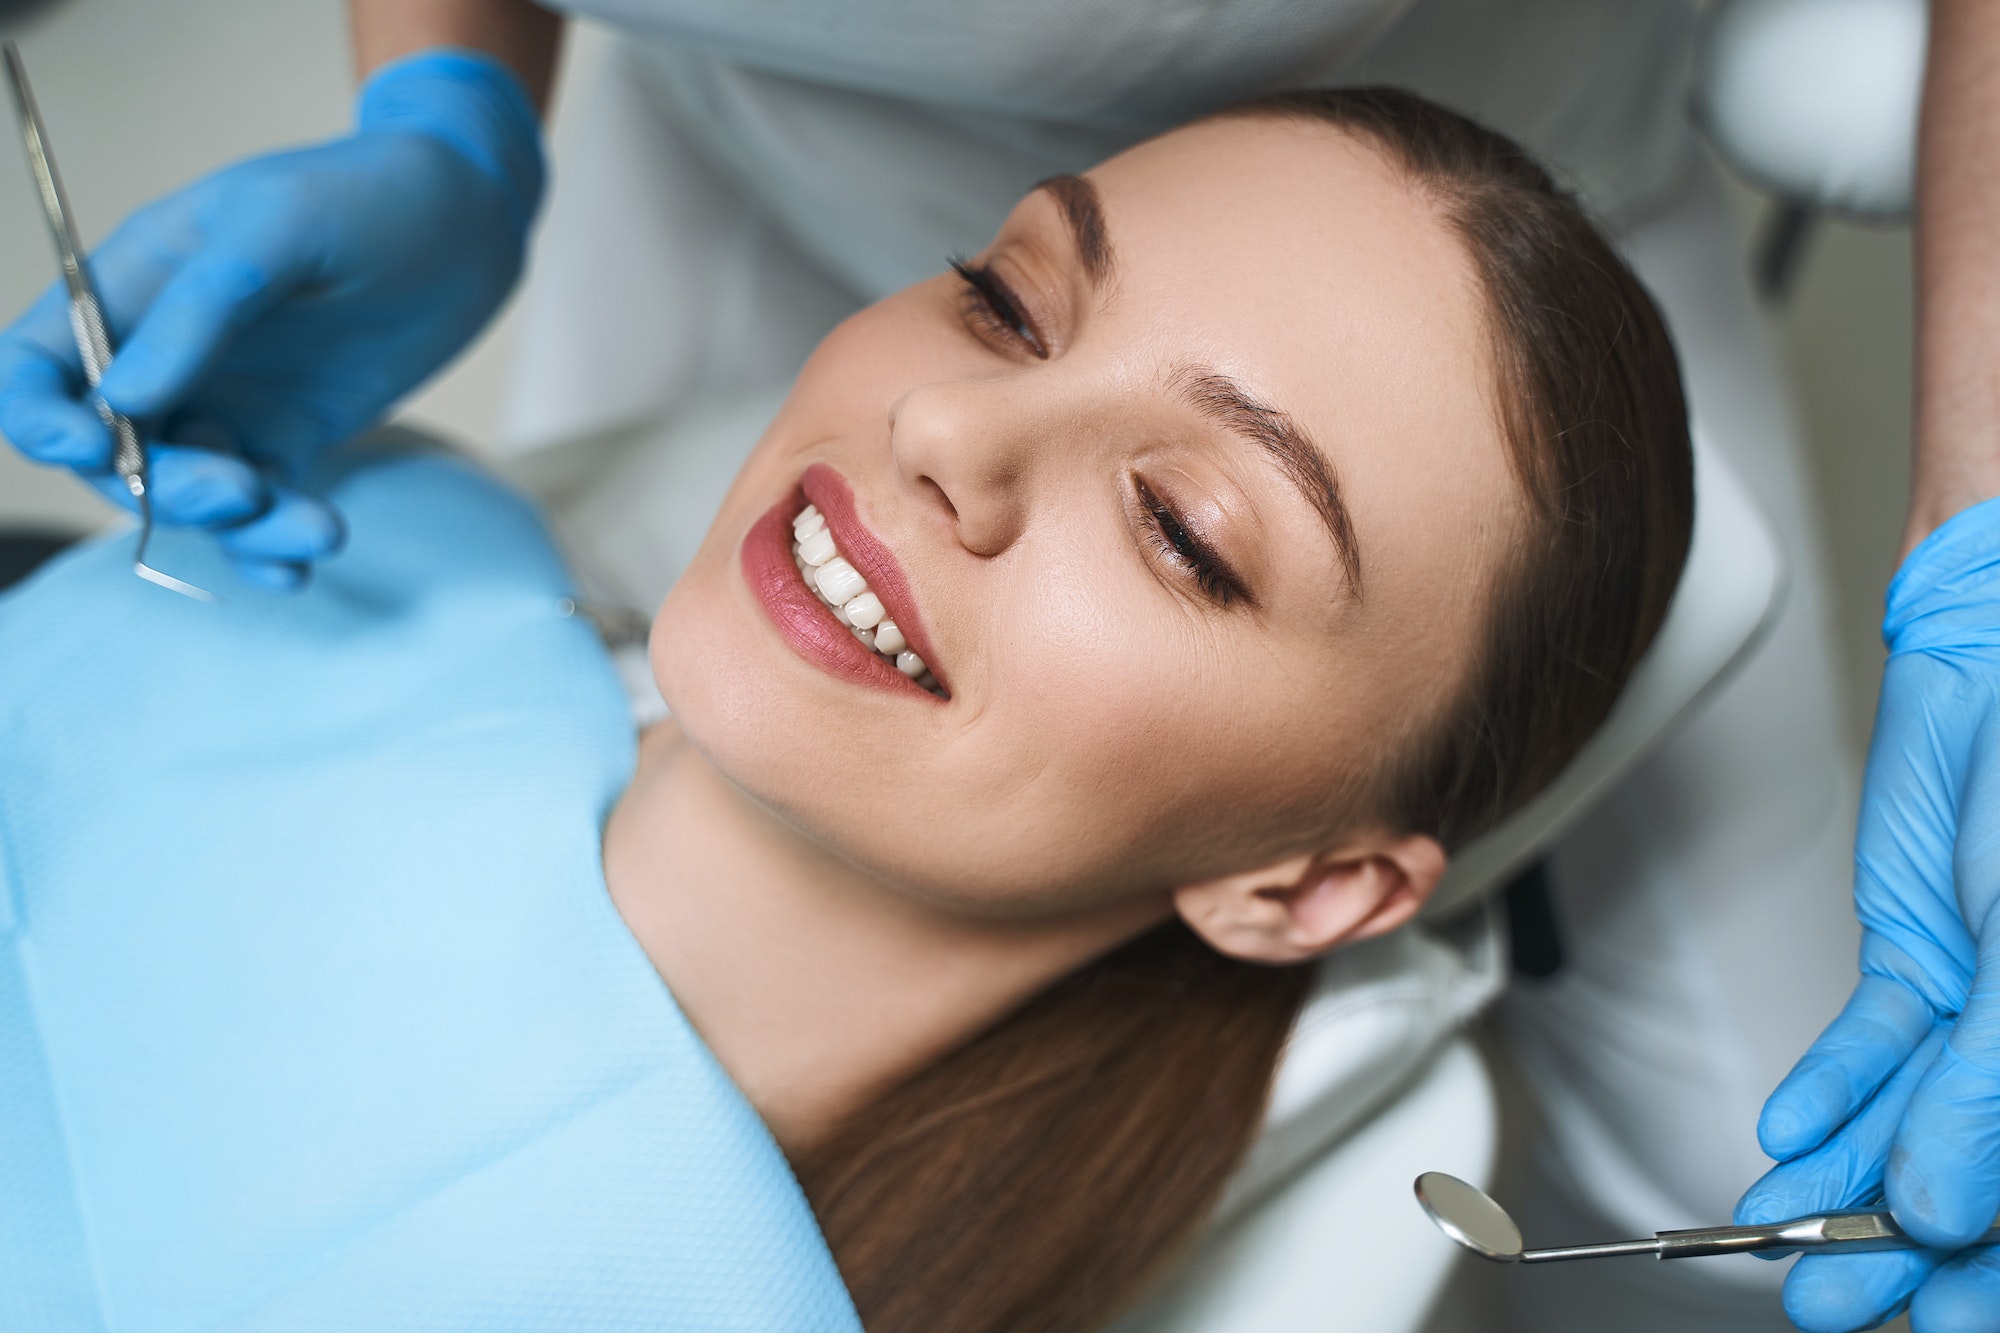 Smiling woman in dental chair stock photo